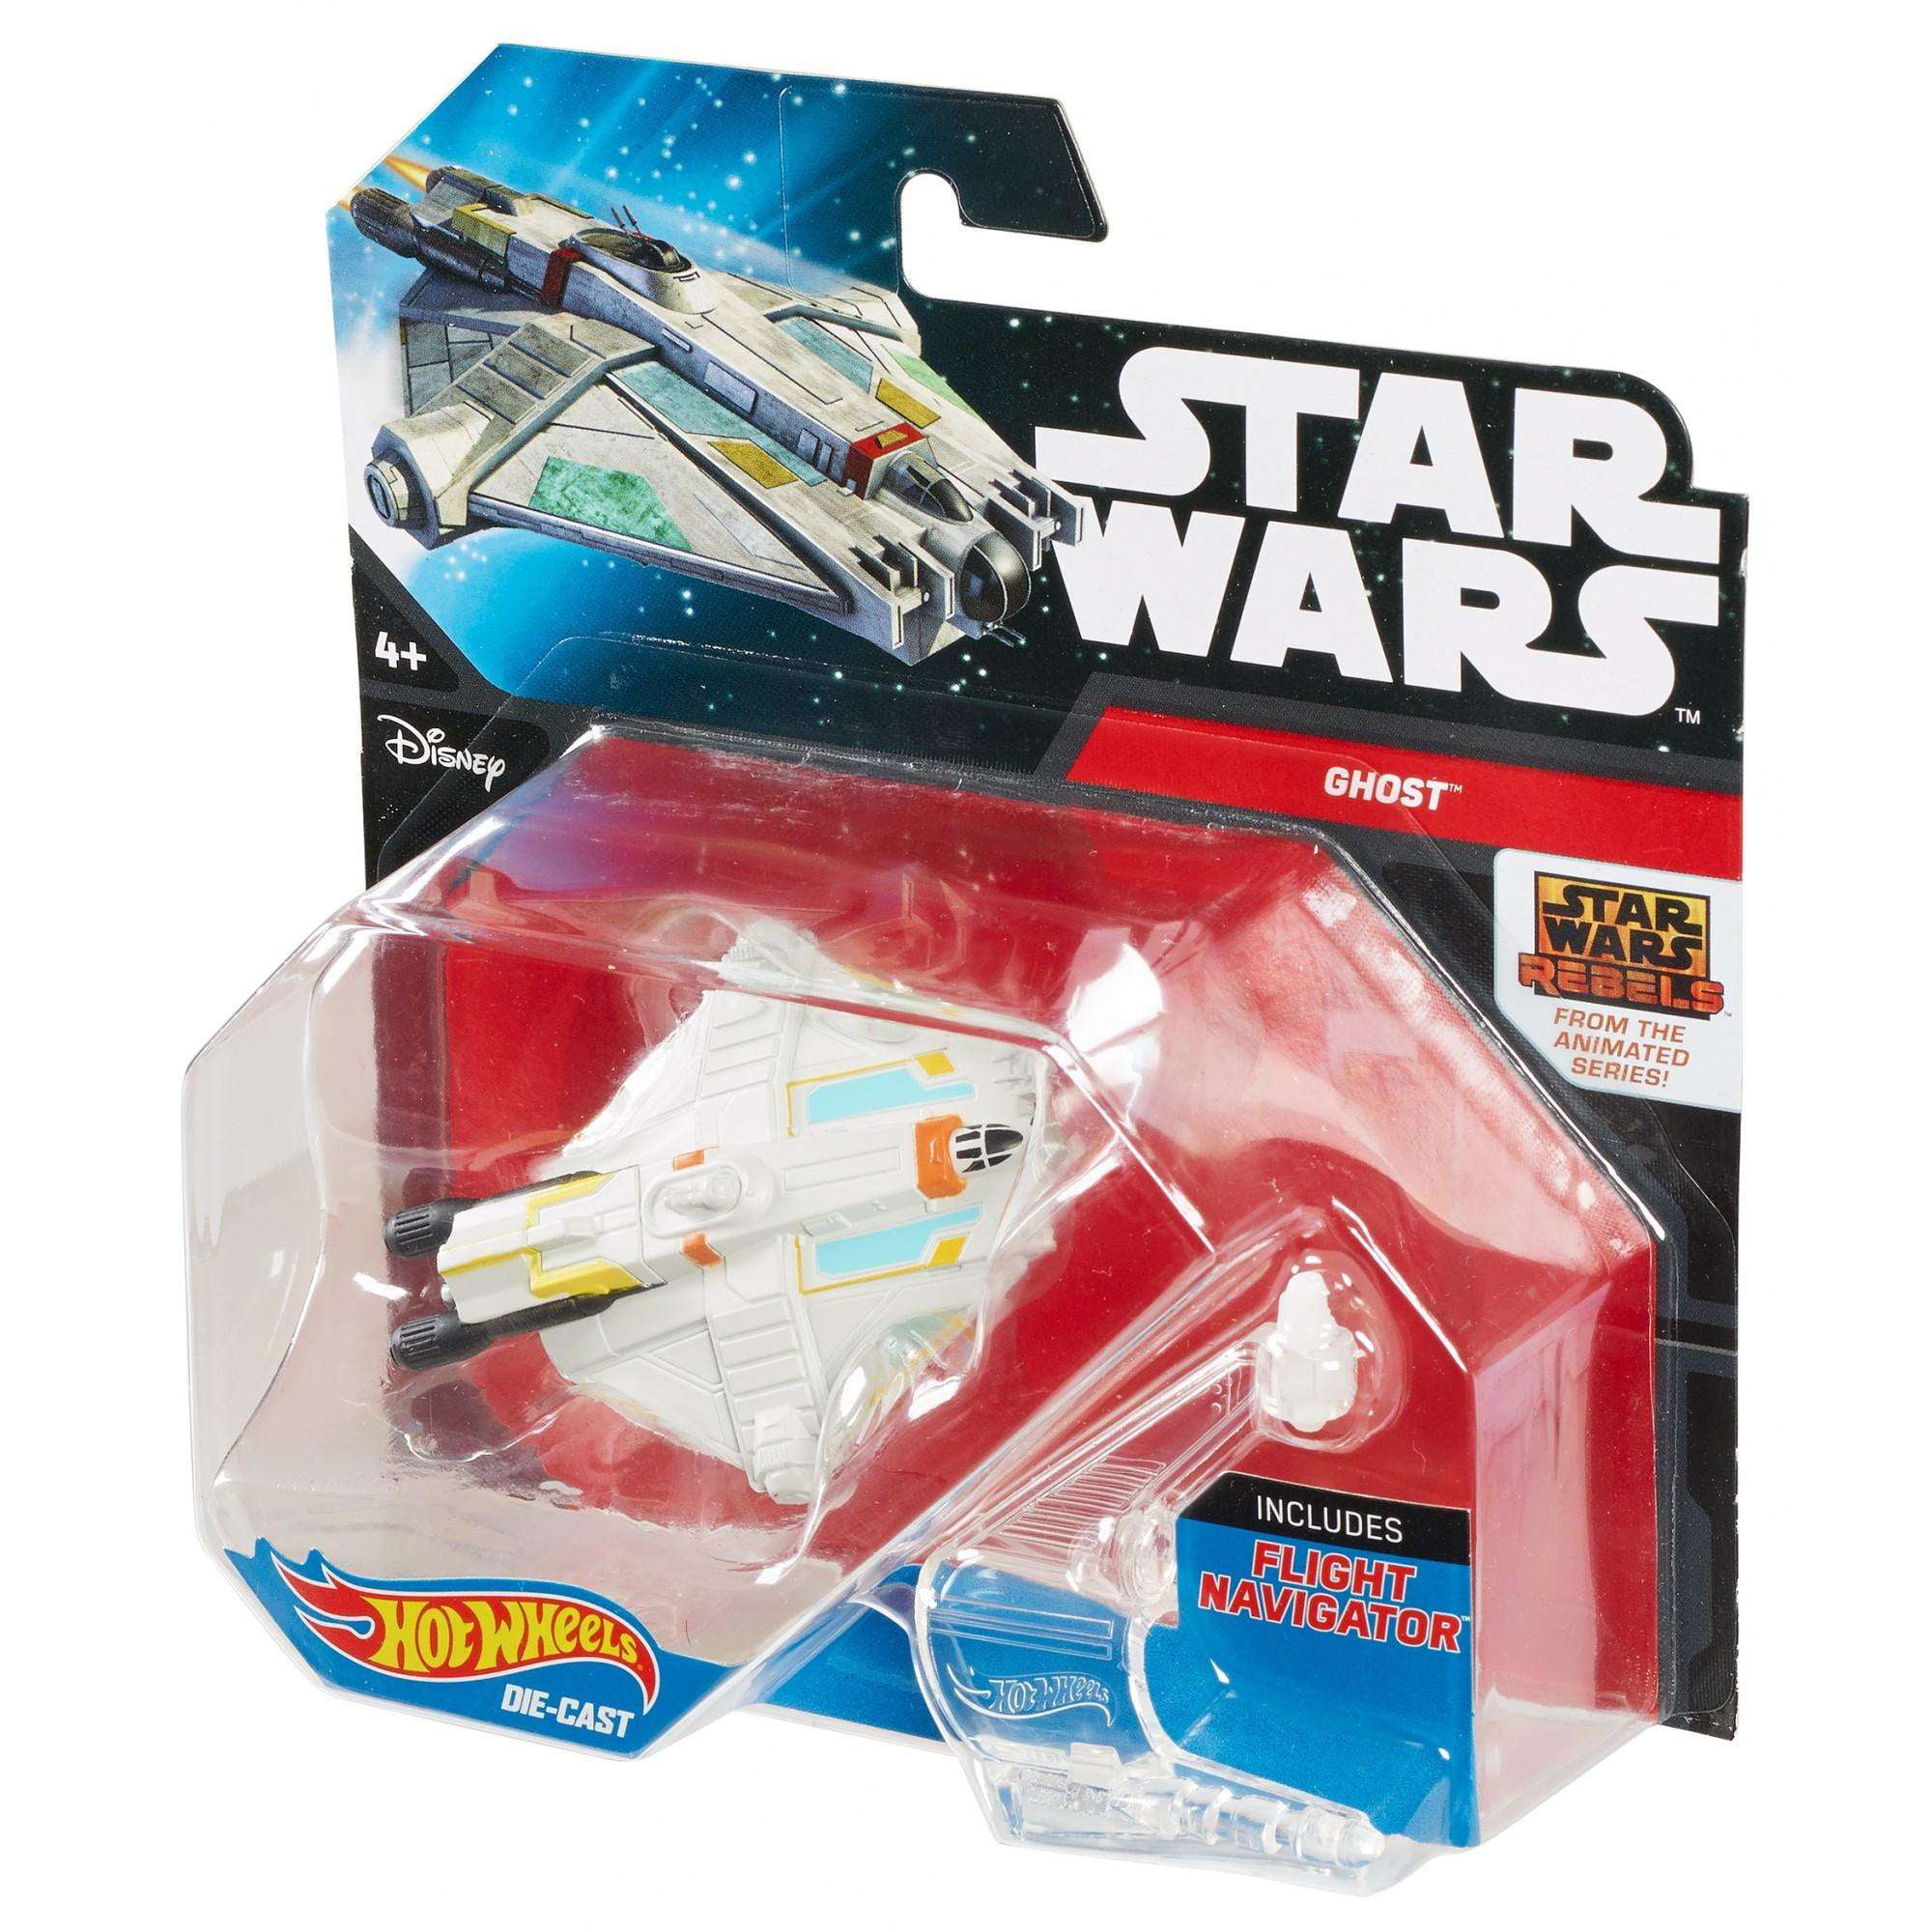 Star Wars Rebels Animated Rogue One Hot Wheels Ghost Starships Toy